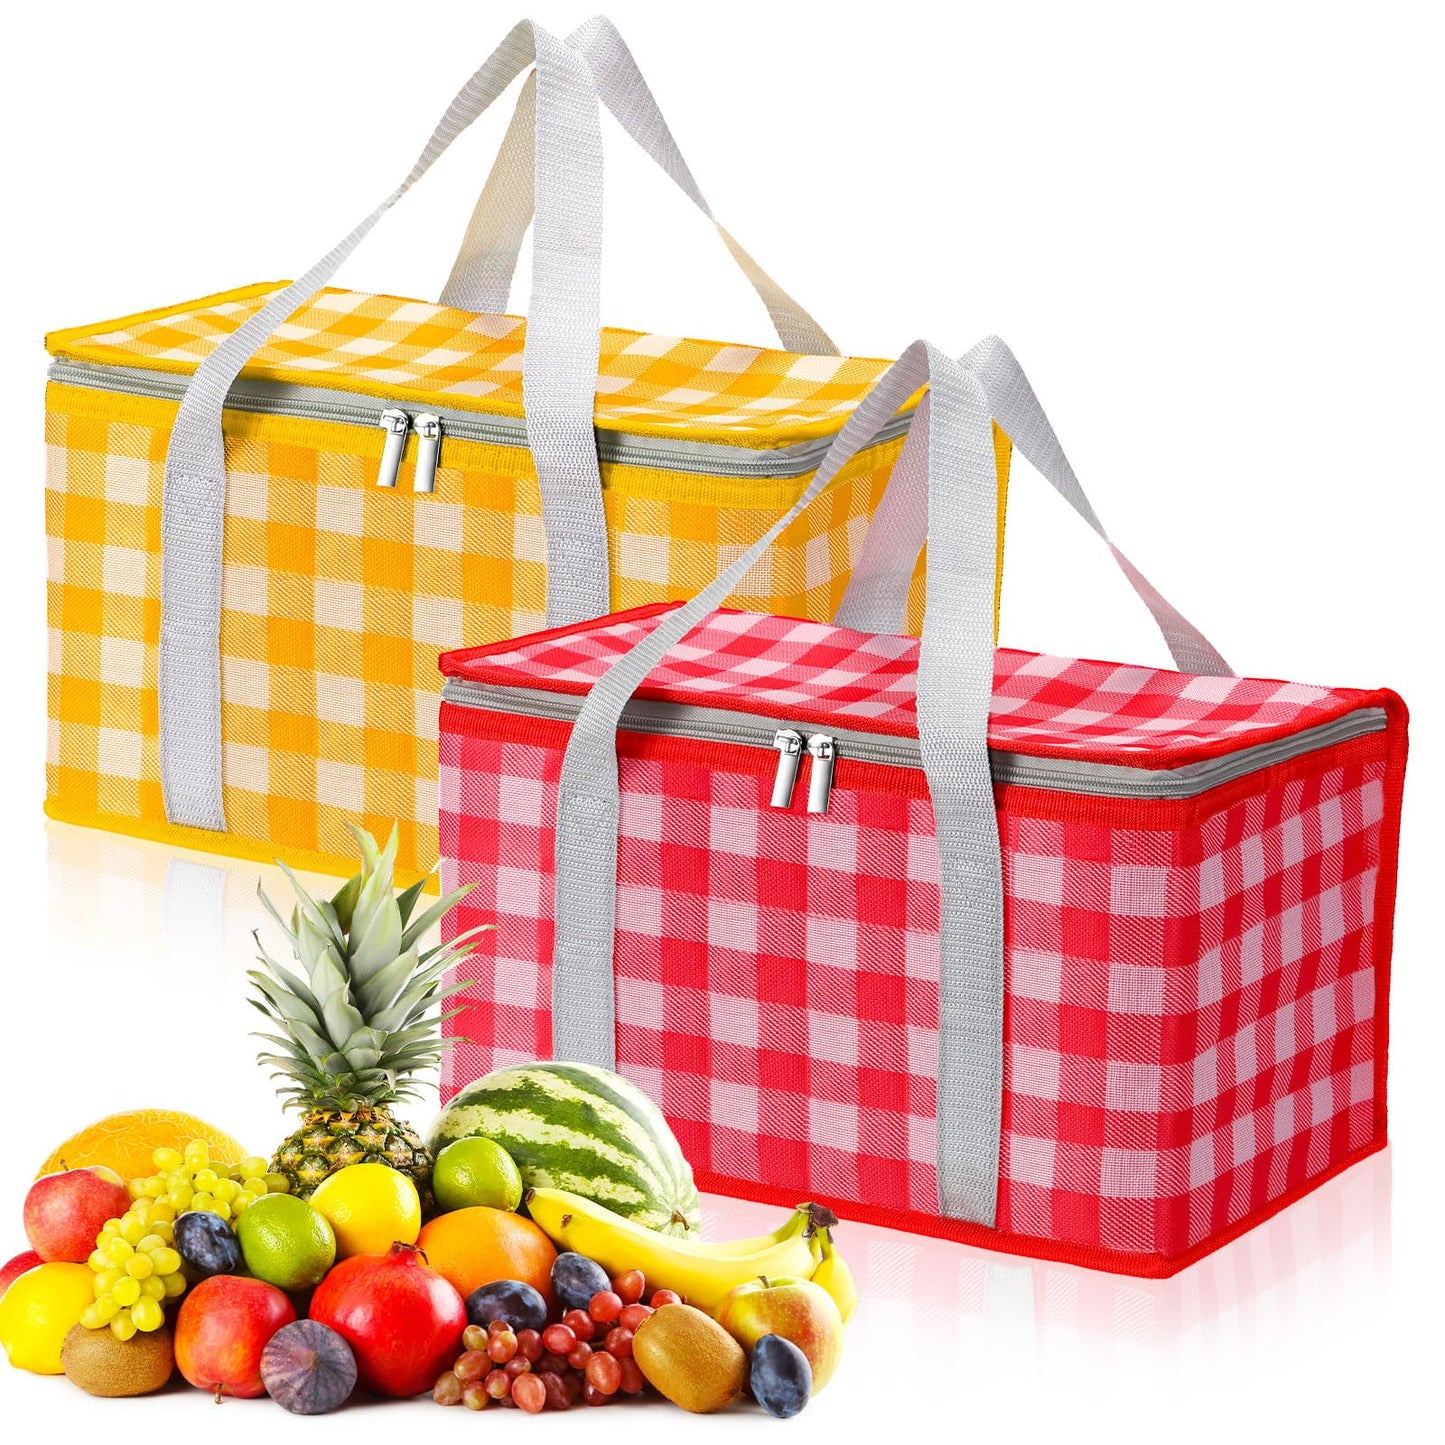 2 Pcs Insulated Picnic Bag Reusable Cooler Bags Food Dilivery Bags Grocery Shopping Beach Bag Leakproof Foldable Picnic Basket with Zippered Top for Picnic Travel Beach Outdoor Hot Cold (Red, Yellow)